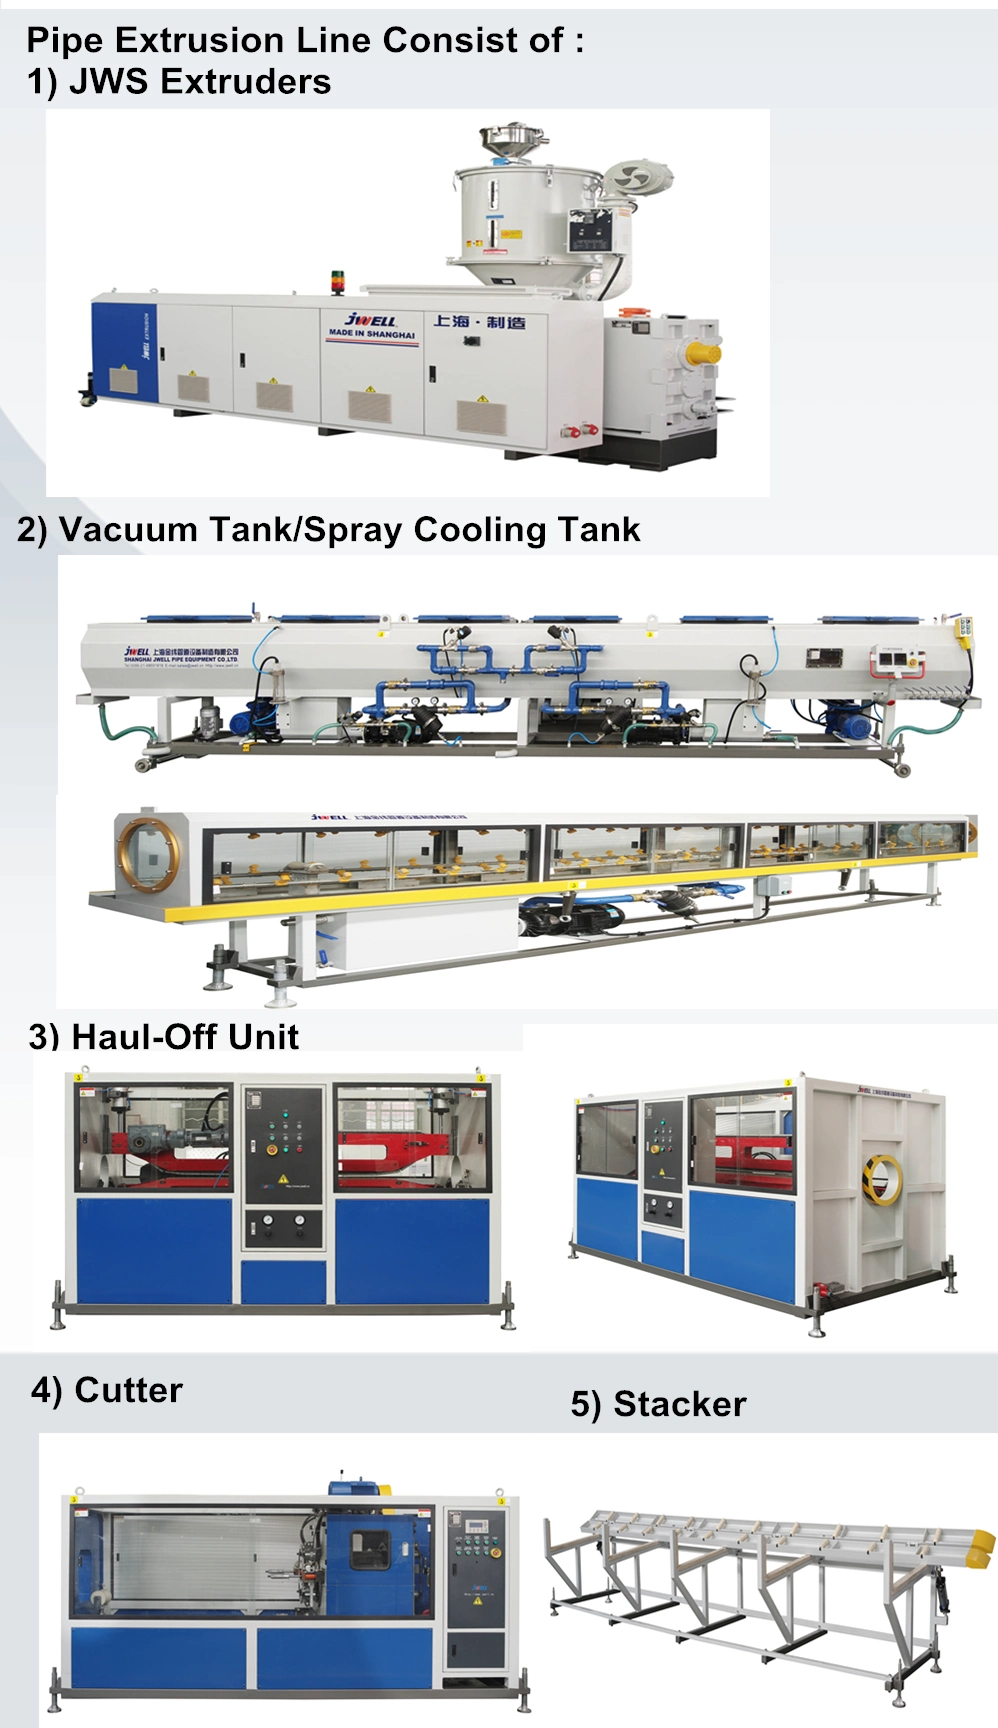 Water/Gas-Supply PP PE HDPE Plastic Pipe/Tube Extrusion Making Machine